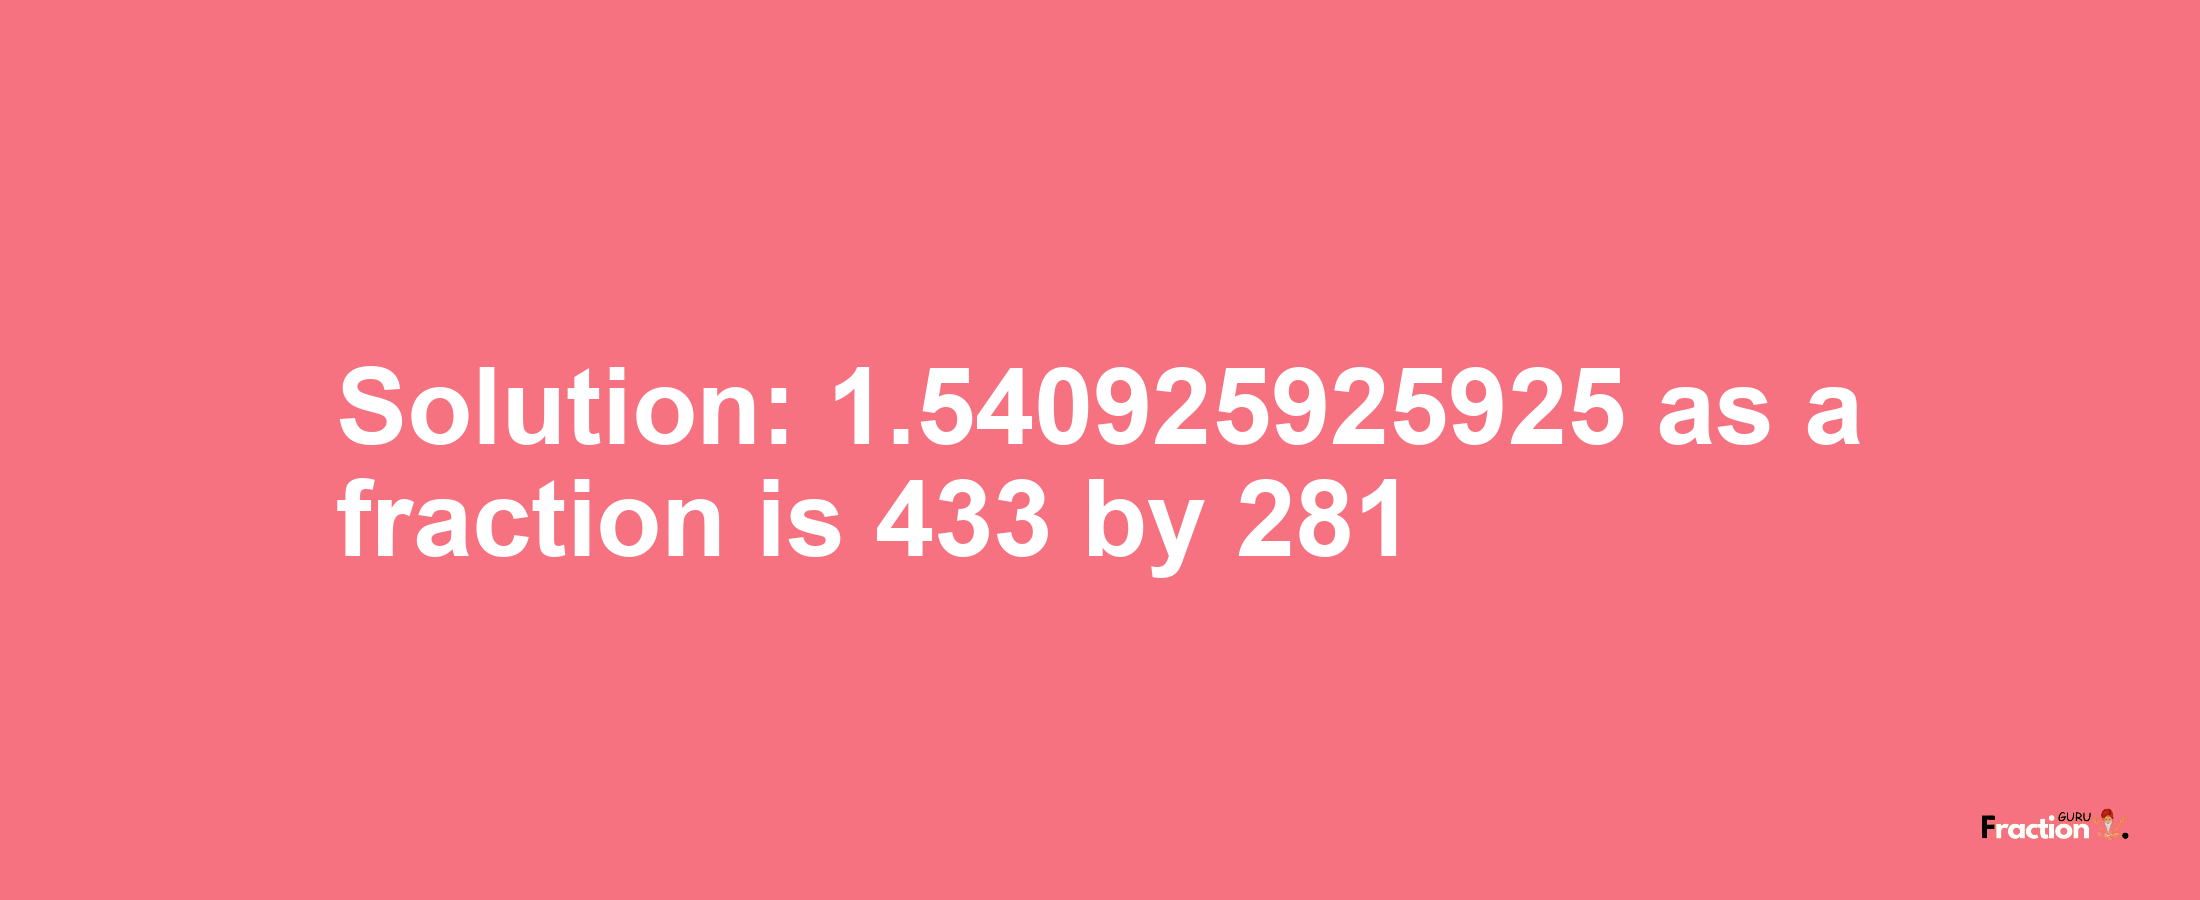 Solution:1.540925925925 as a fraction is 433/281